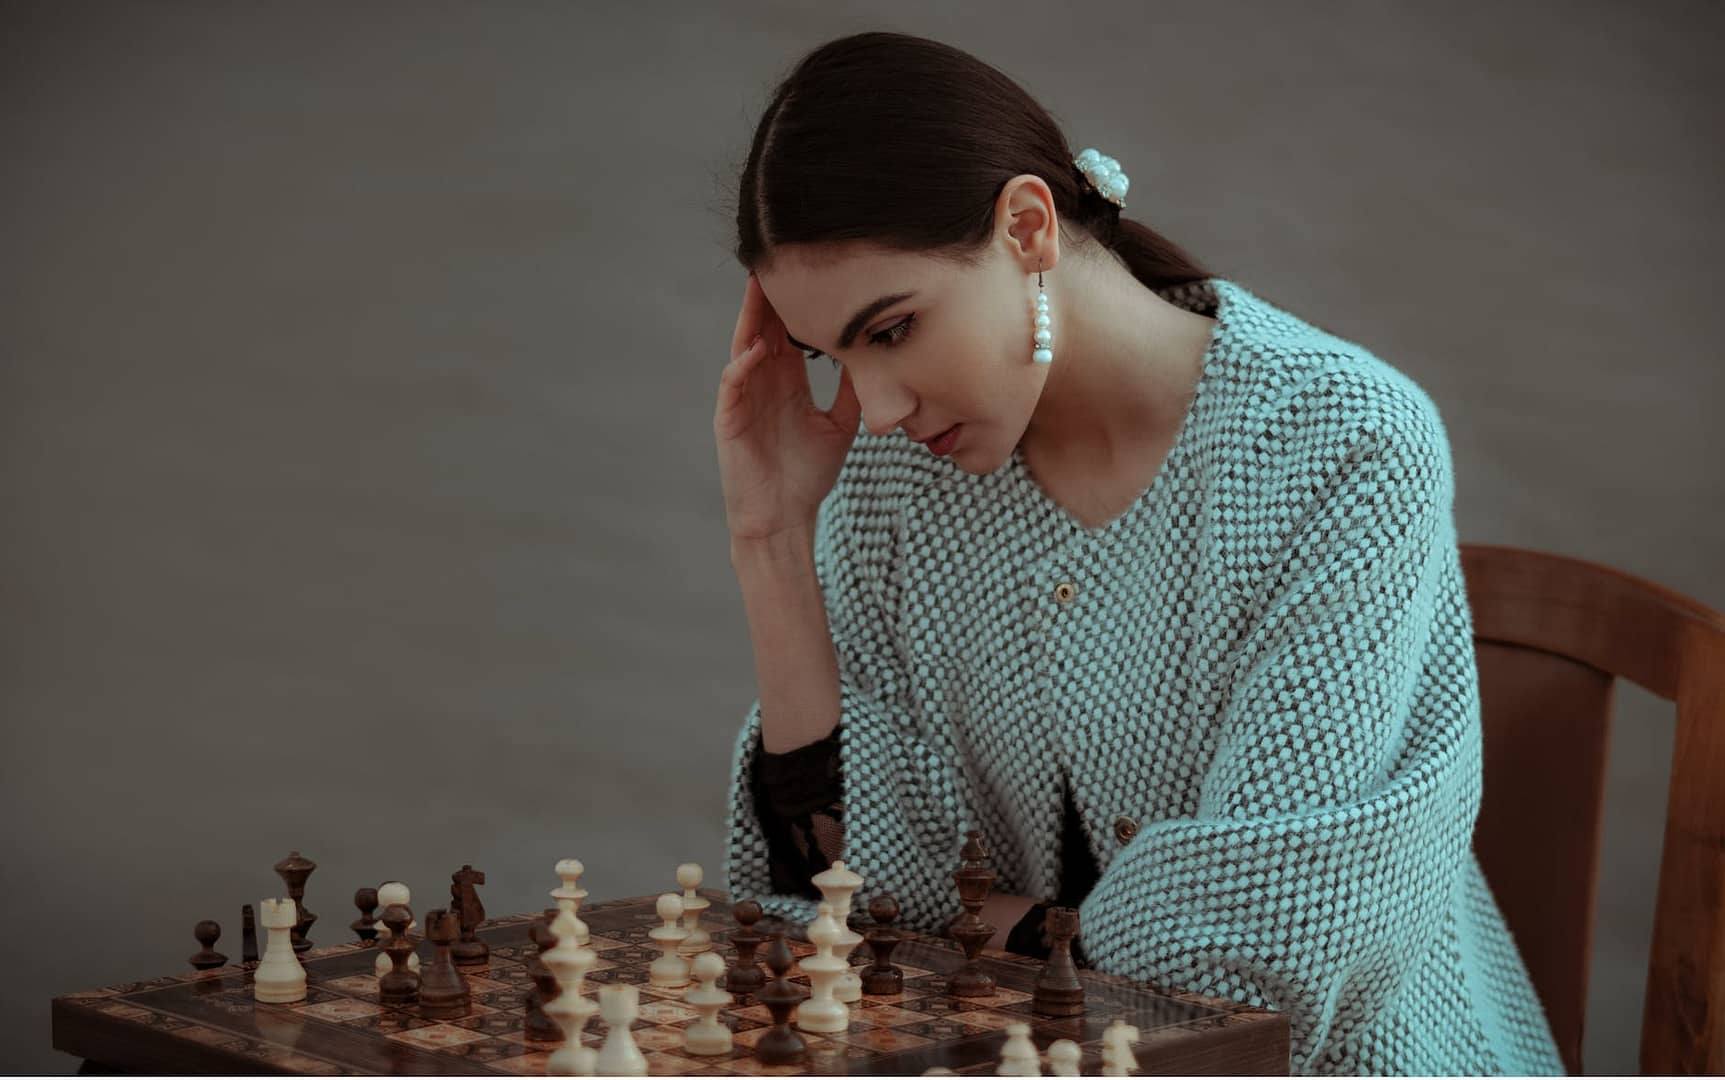 pensive ethnic woman thinking on chess move